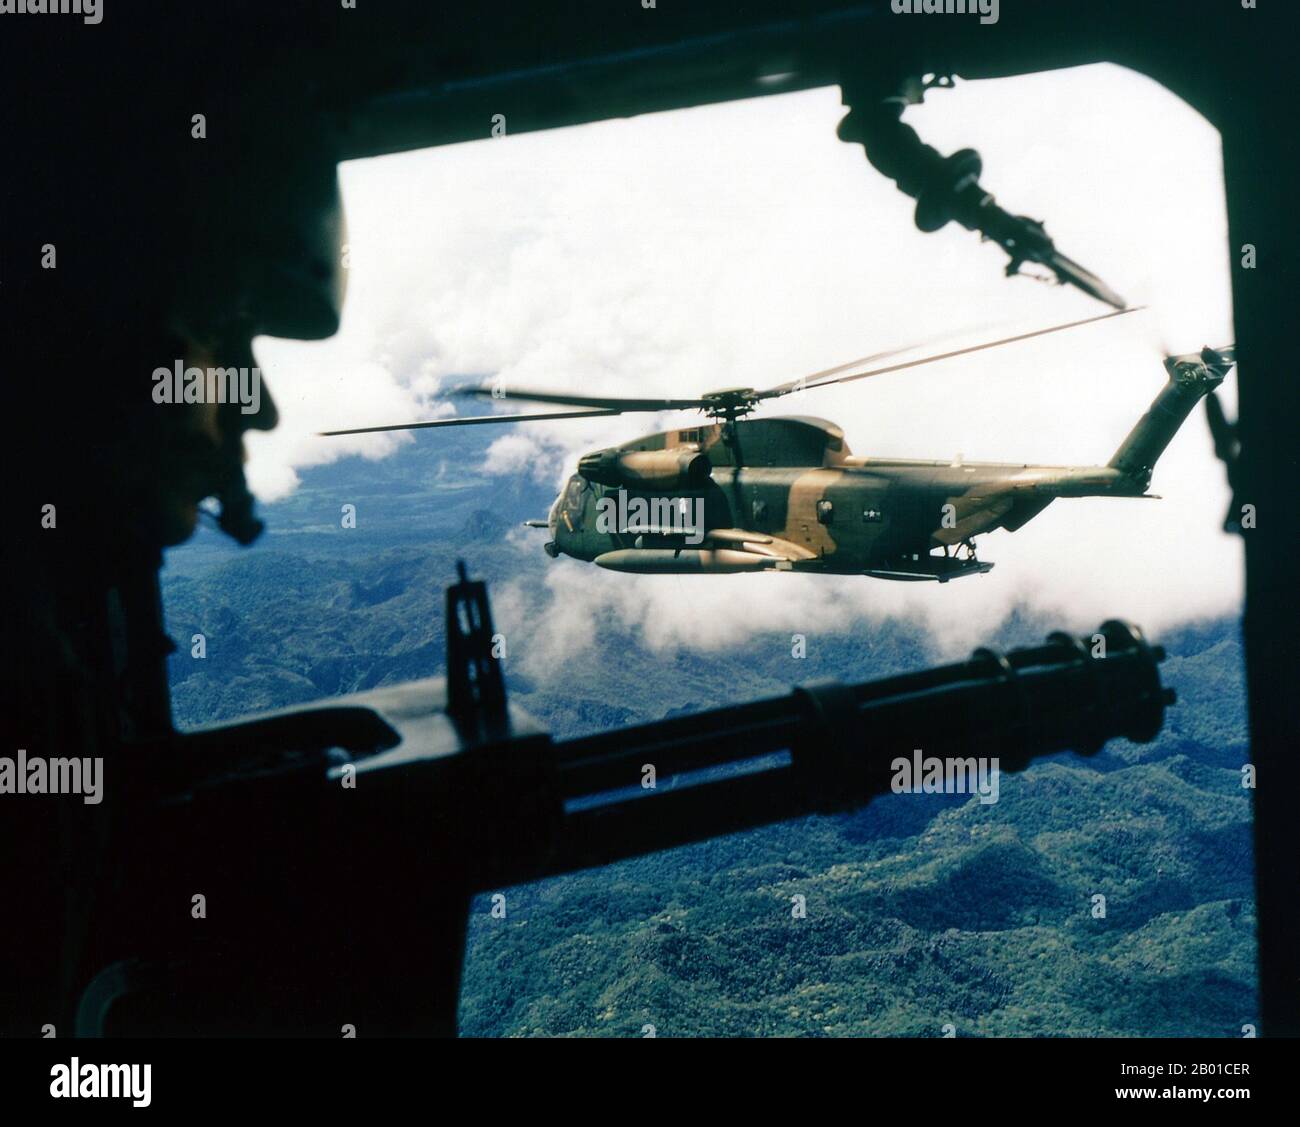 Vietnam: A U.S. Air Force Sikorsky HH-53 Super Jolly Green Giant helicopter seen from the gunner's position in a helicopter of the 21st Special Operations Squadron, Vietnam. Photo by Ken Hackman (public domain), October 1972.  The Second Indochina War, known in America as the Vietnam War, was a Cold War era military conflict that occurred in Vietnam, Laos, and Cambodia from 1 November 1955 to the fall of Saigon on 30 April 1975. This war followed the First Indochina War and was fought between North Vietnam and the government of South Vietnam, supported by the United States. Stock Photo